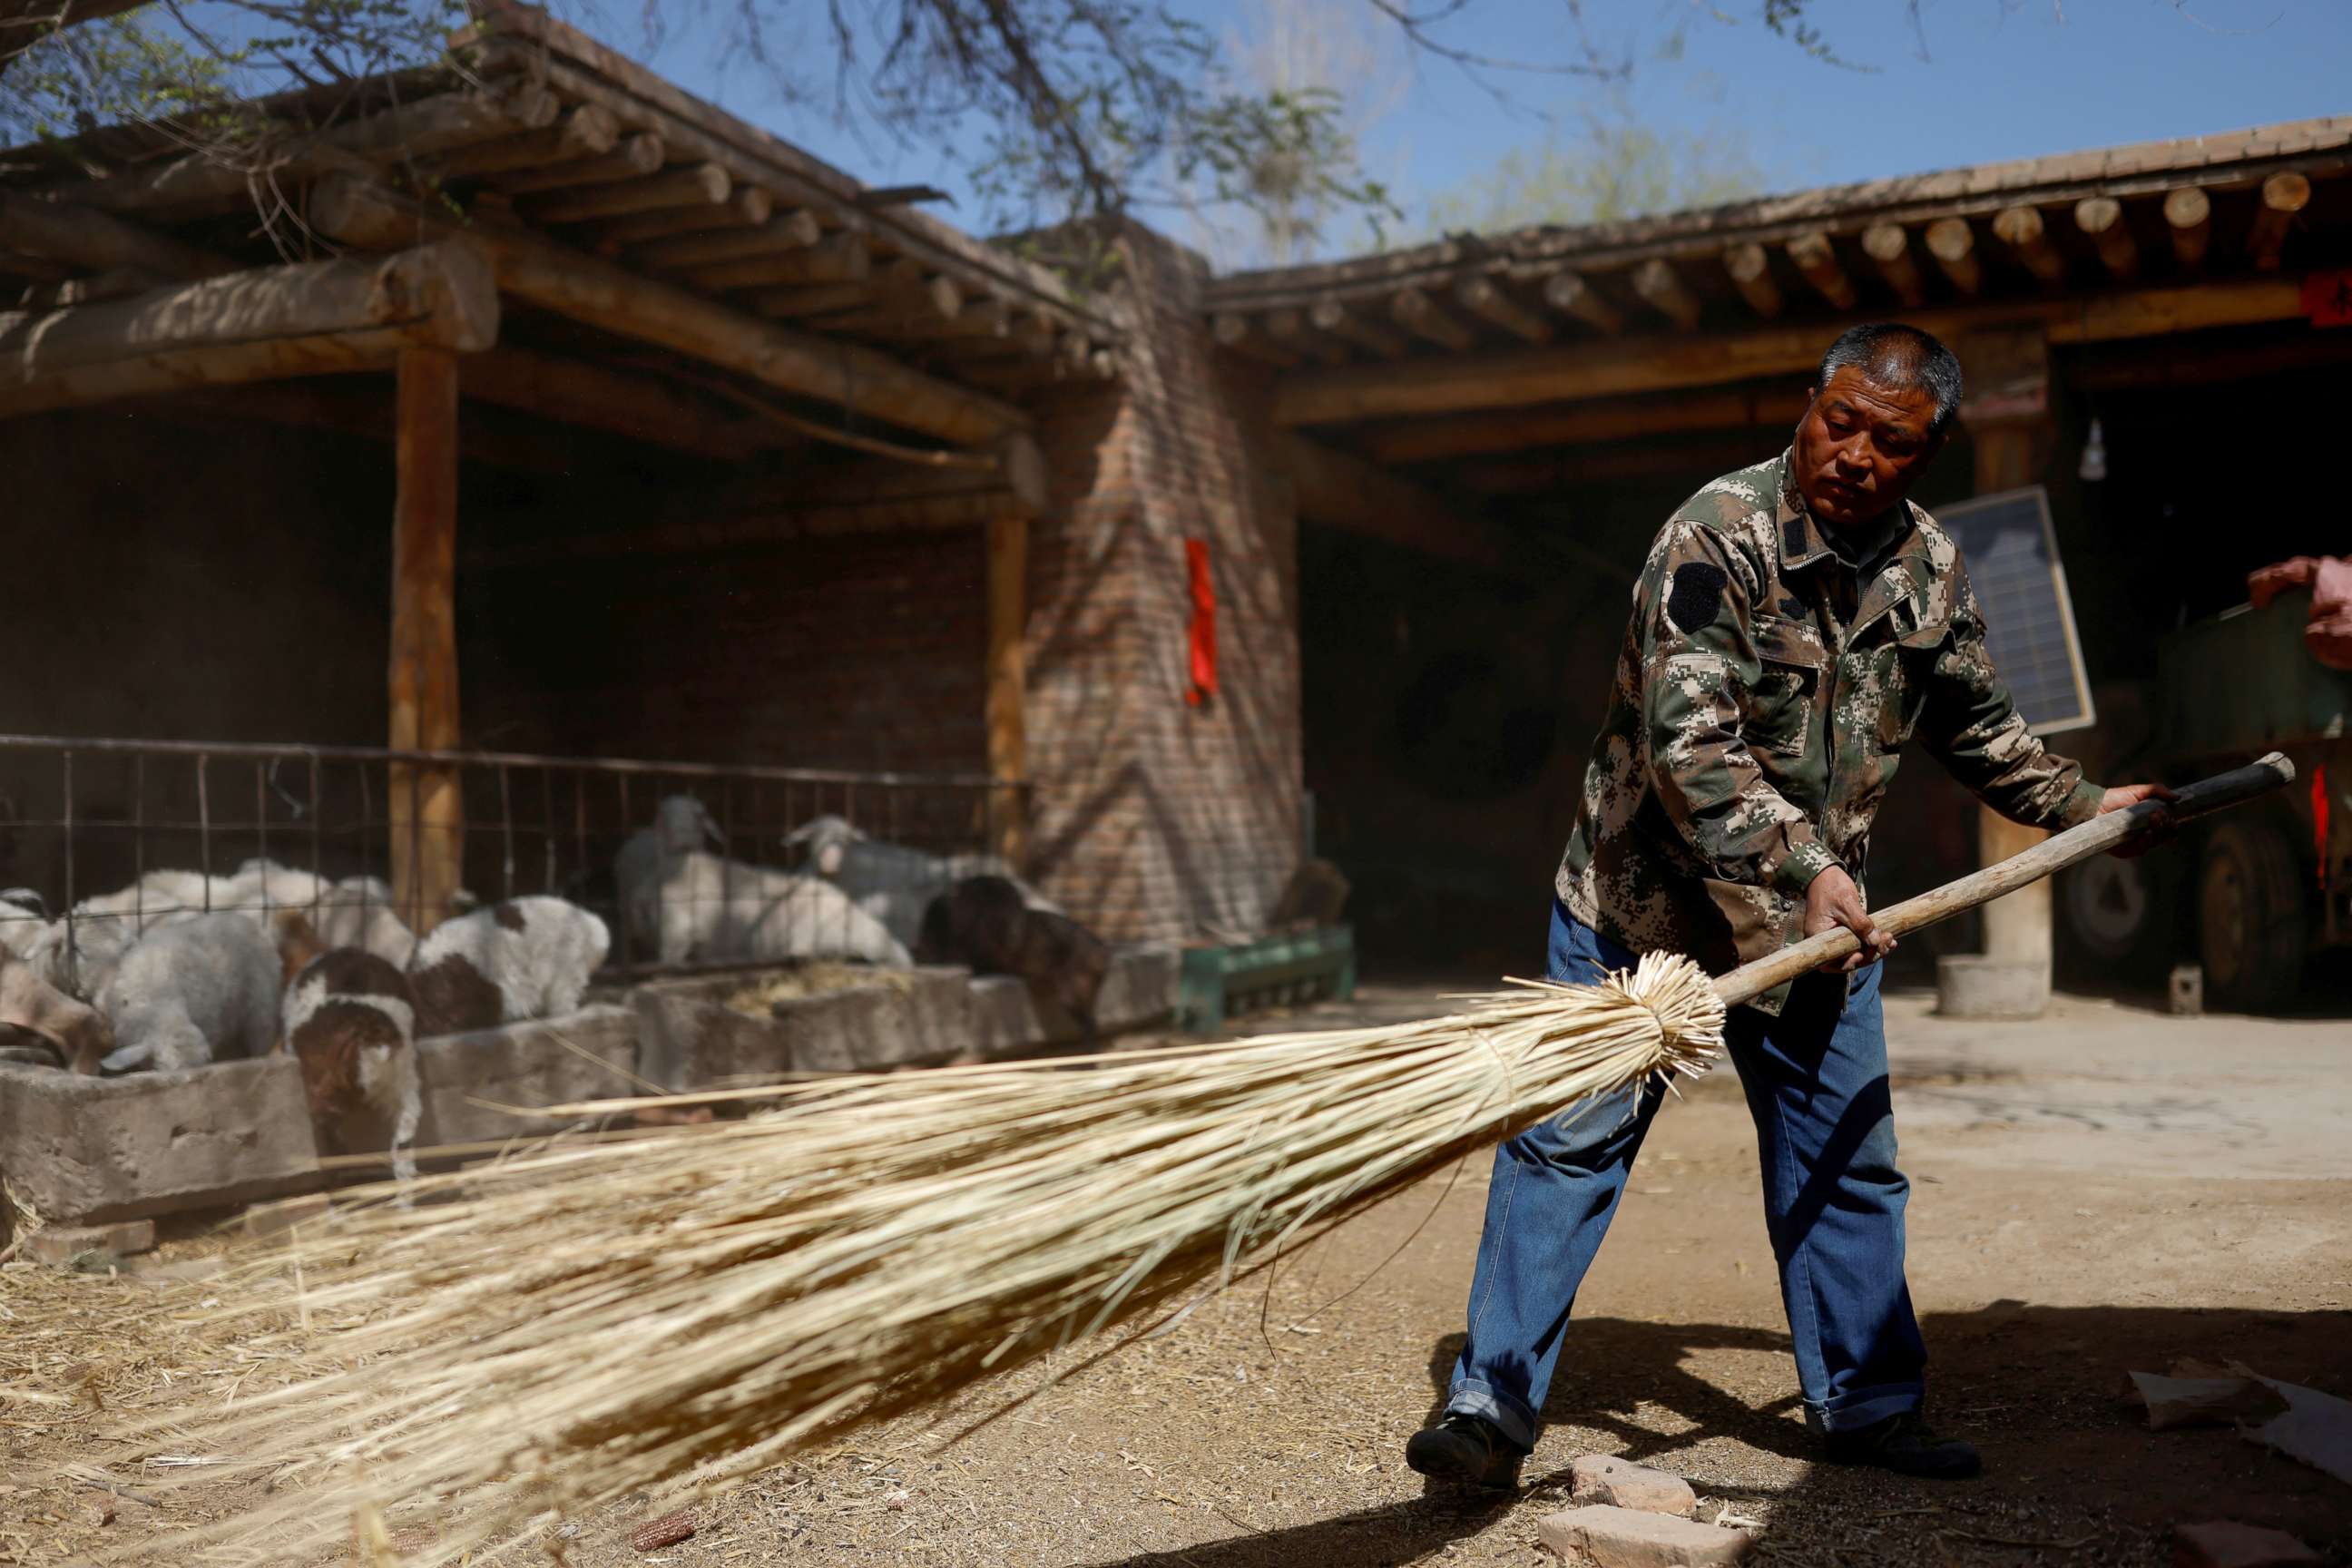 PHOTO: Wang Yinji, 53, cleans the backyard of his house in a village near the edge of the Gobi desert, on the outskirts of Wuwei, China, April 14, 2021.